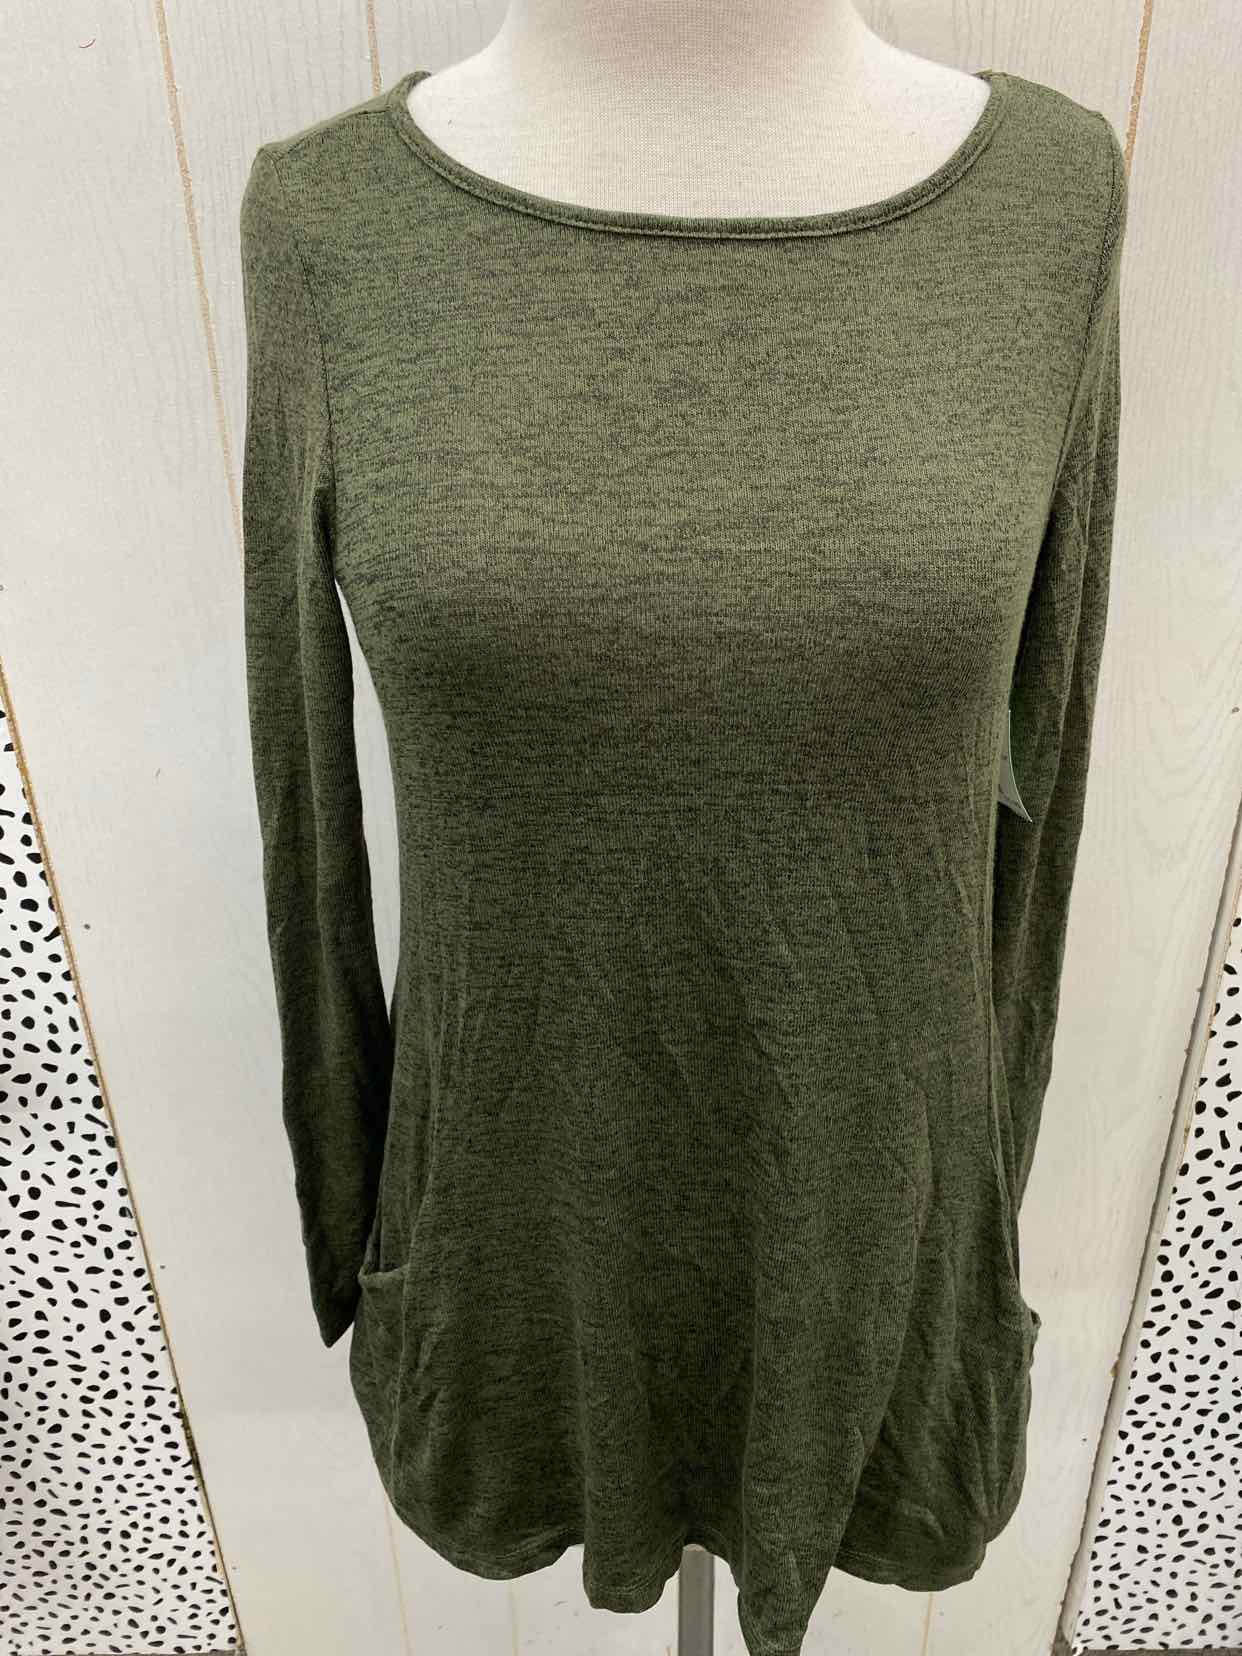 Maurices Olive Womens Size XS Shirt